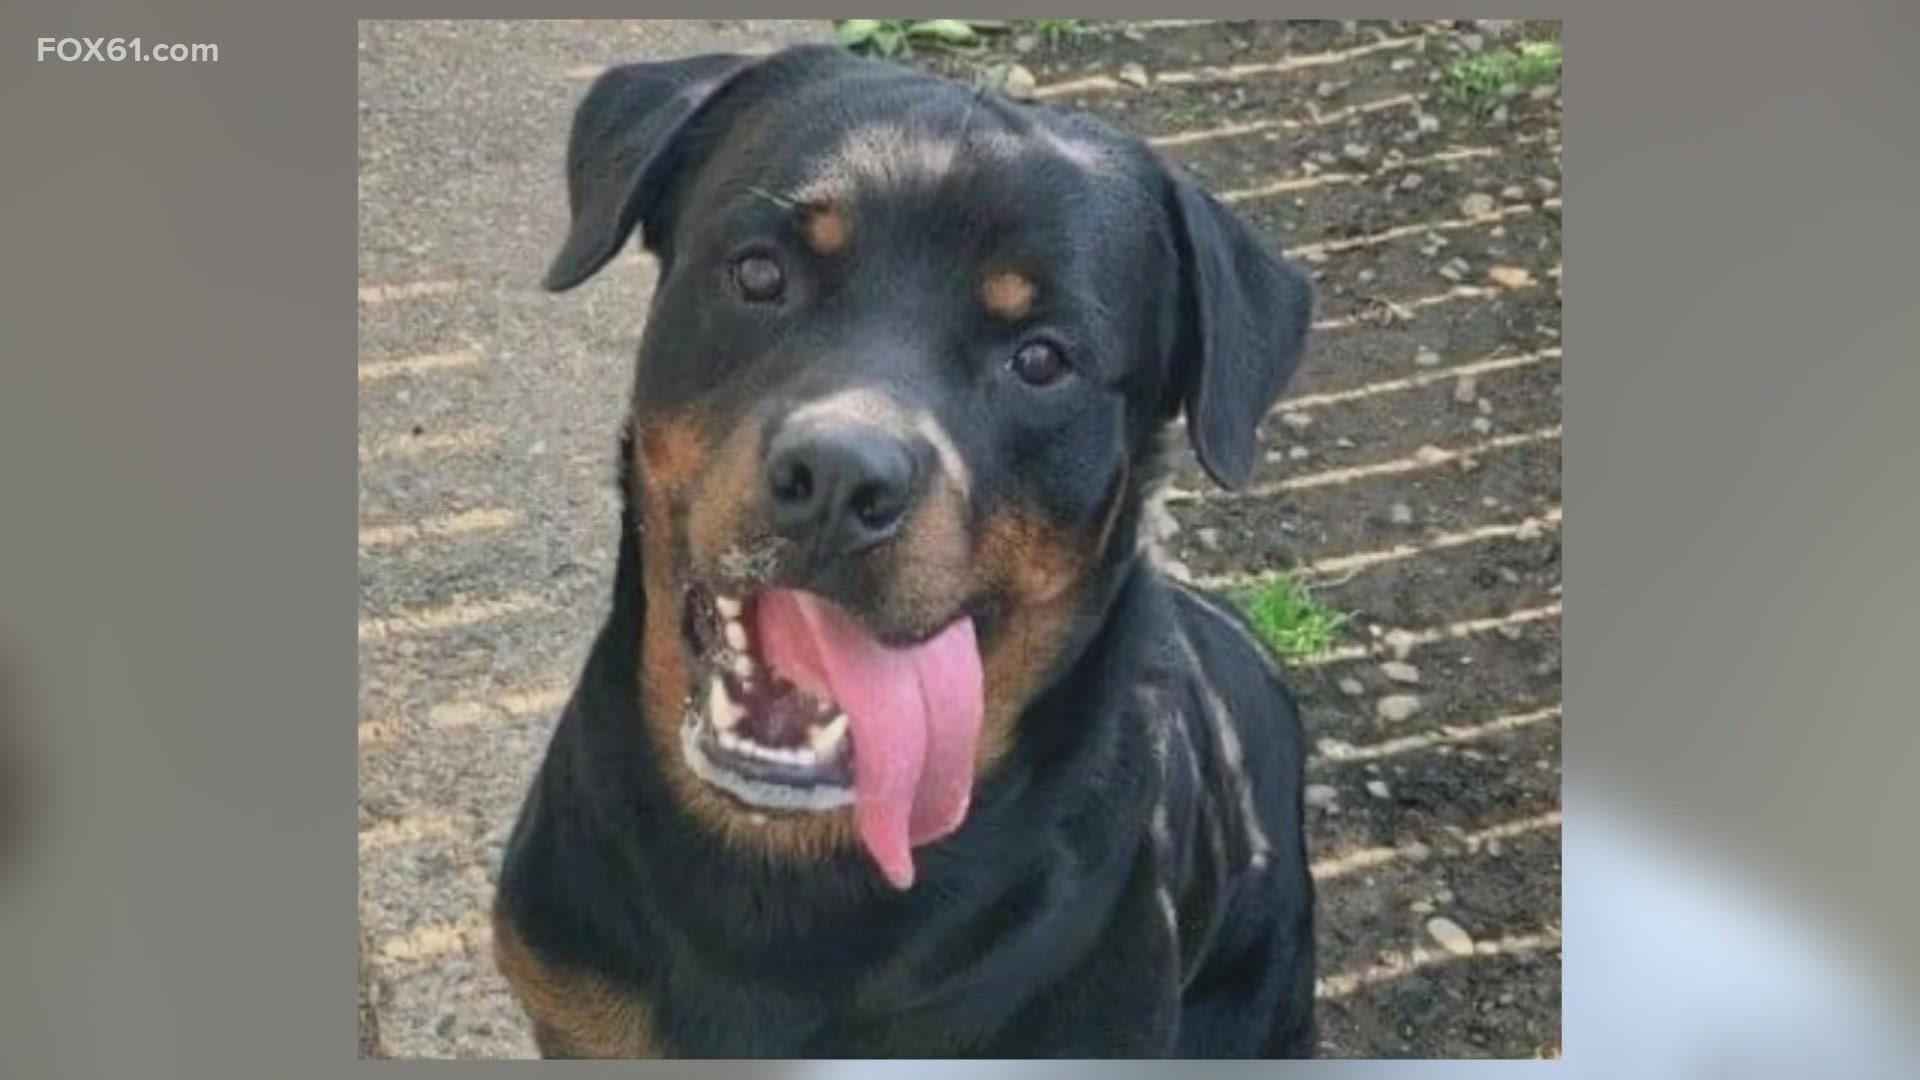 Luis Alberto Perez beat his 1-year-old Rottweiler named Grizzly with an aluminum baseball bat and evidence showed it may not have been the first time.